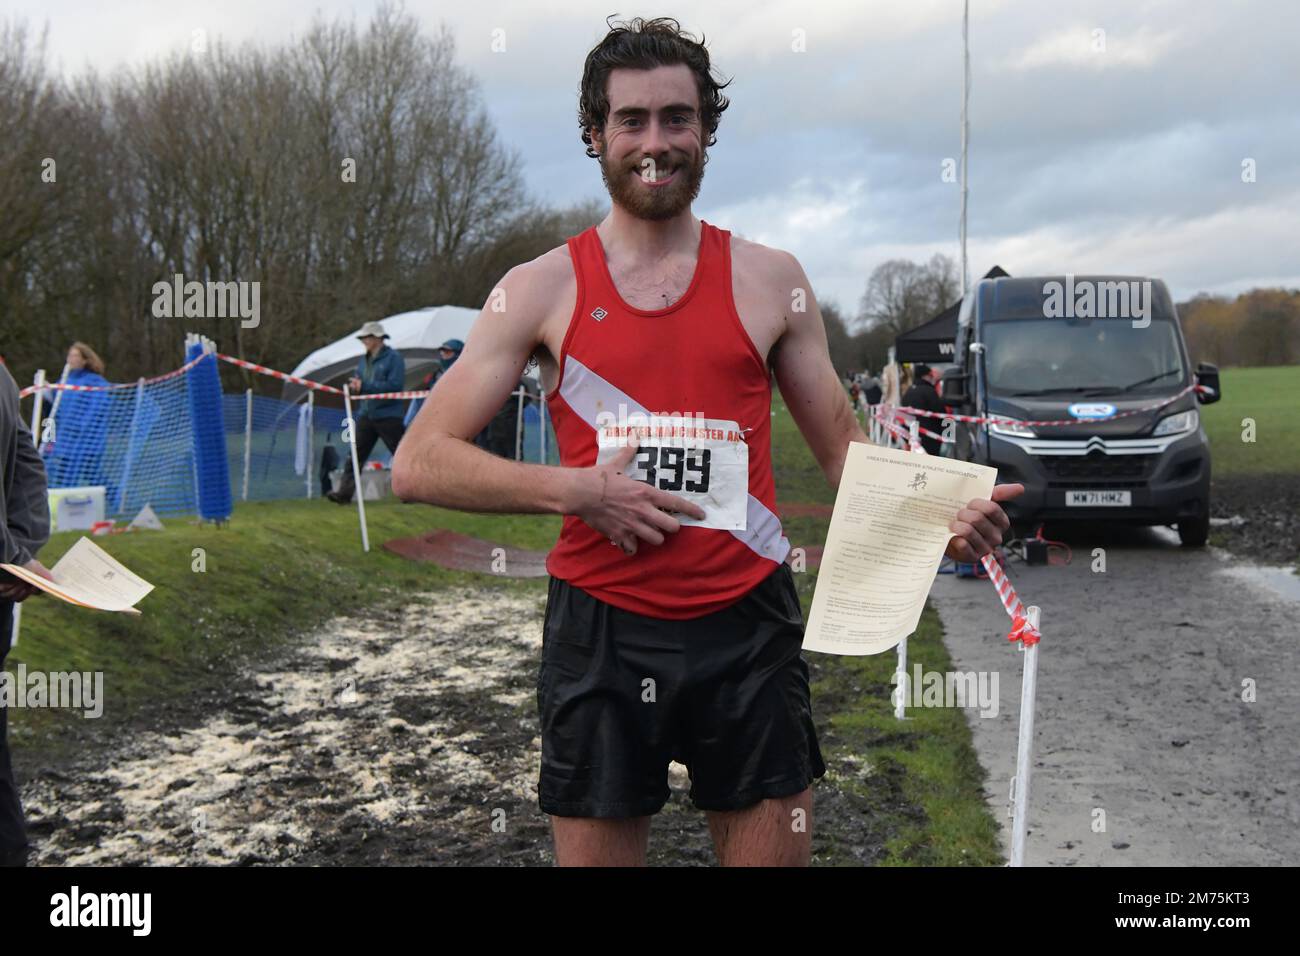 Bolton, UK. Saturday, 7 January, 2023. Cloudy, sunny intervals. Joe Steward, Salford Harriers and athletics club wins Greater Manchester Athletic Association 2022 (rescheduled) Annual Cross Country Championships, senior men's race. Leverhulme park, Bolton, Greater Manchester. © Yoko Shelley Credit: Yoko Shelley/Alamy Live News. Stock Photo